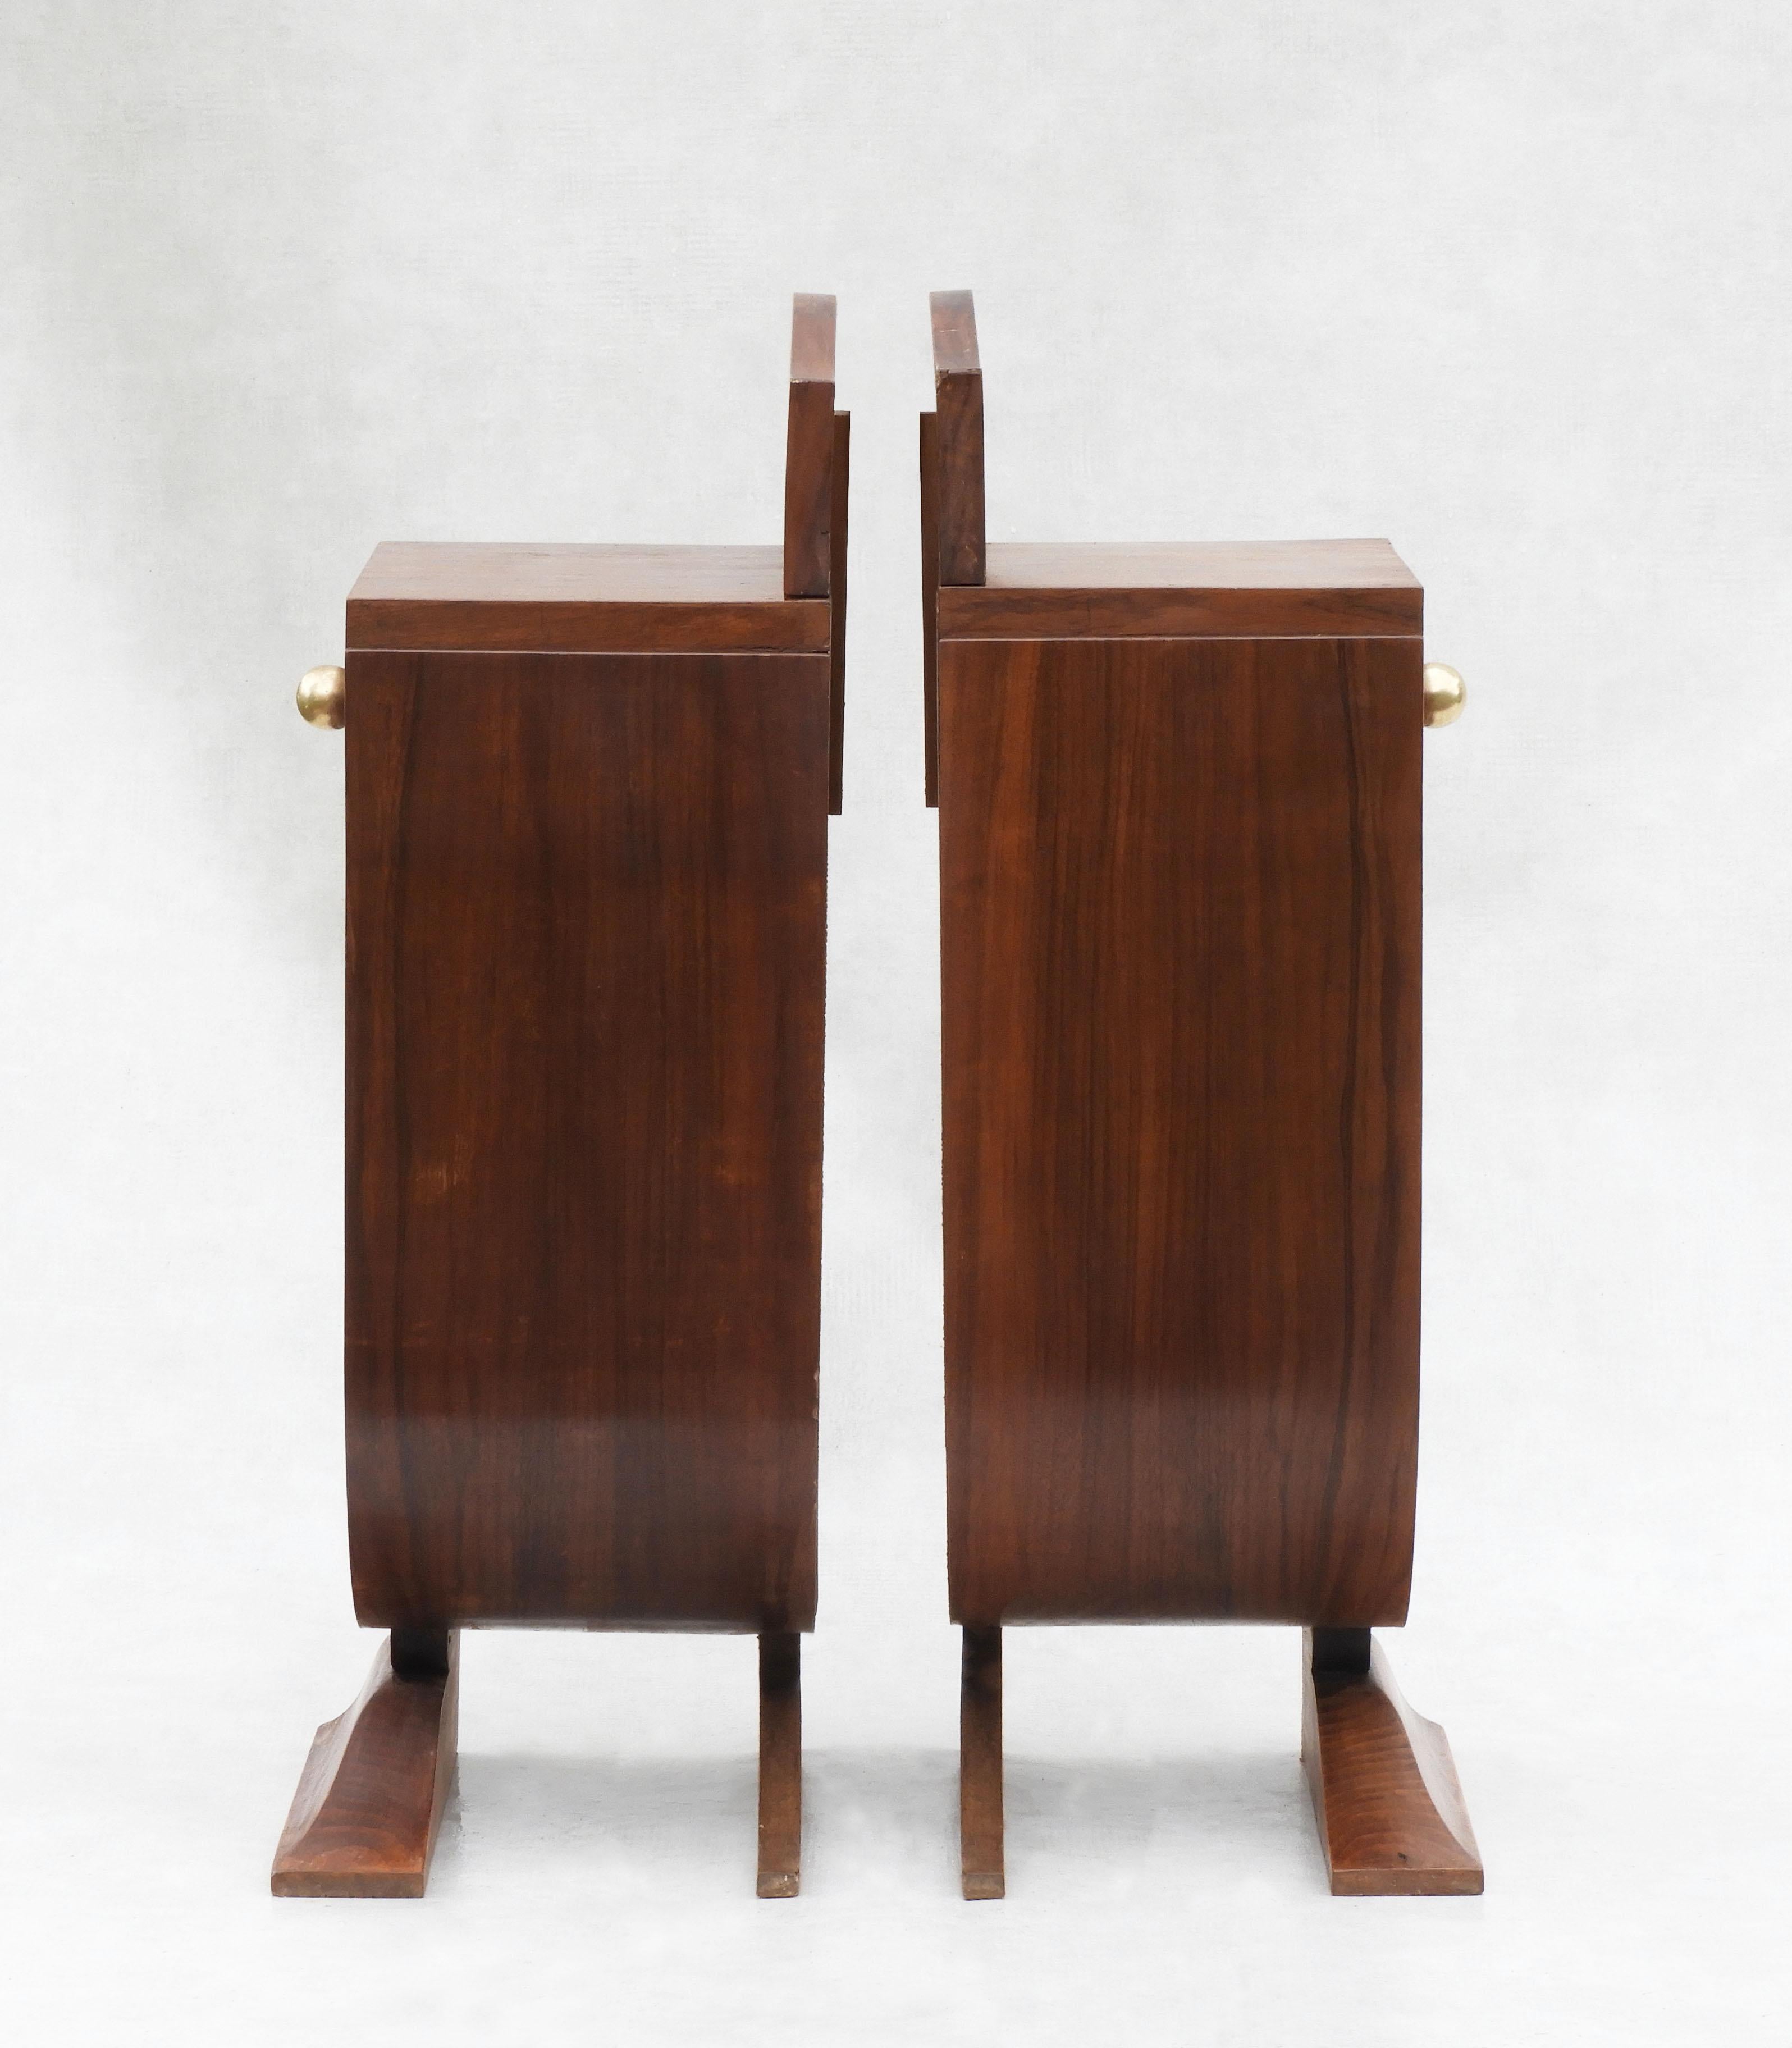 Brass Pair of Art Deco Nightstands, Side Cabinets or Sofa End Tables, C1930s France For Sale